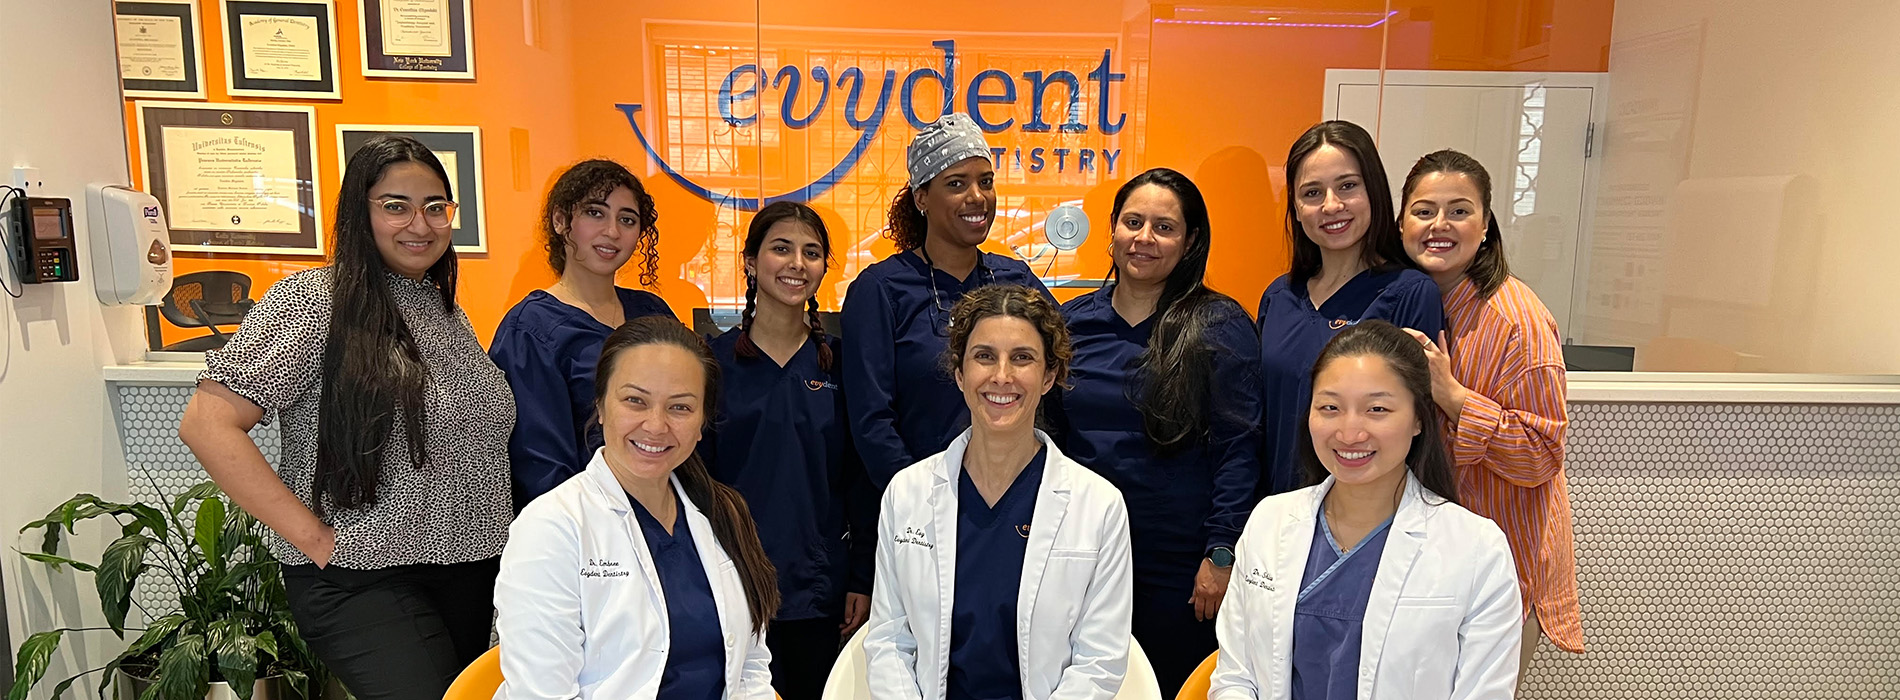 Evydent Dentistry | Braces and Clear Aligners, Digital Dentistry and Kids